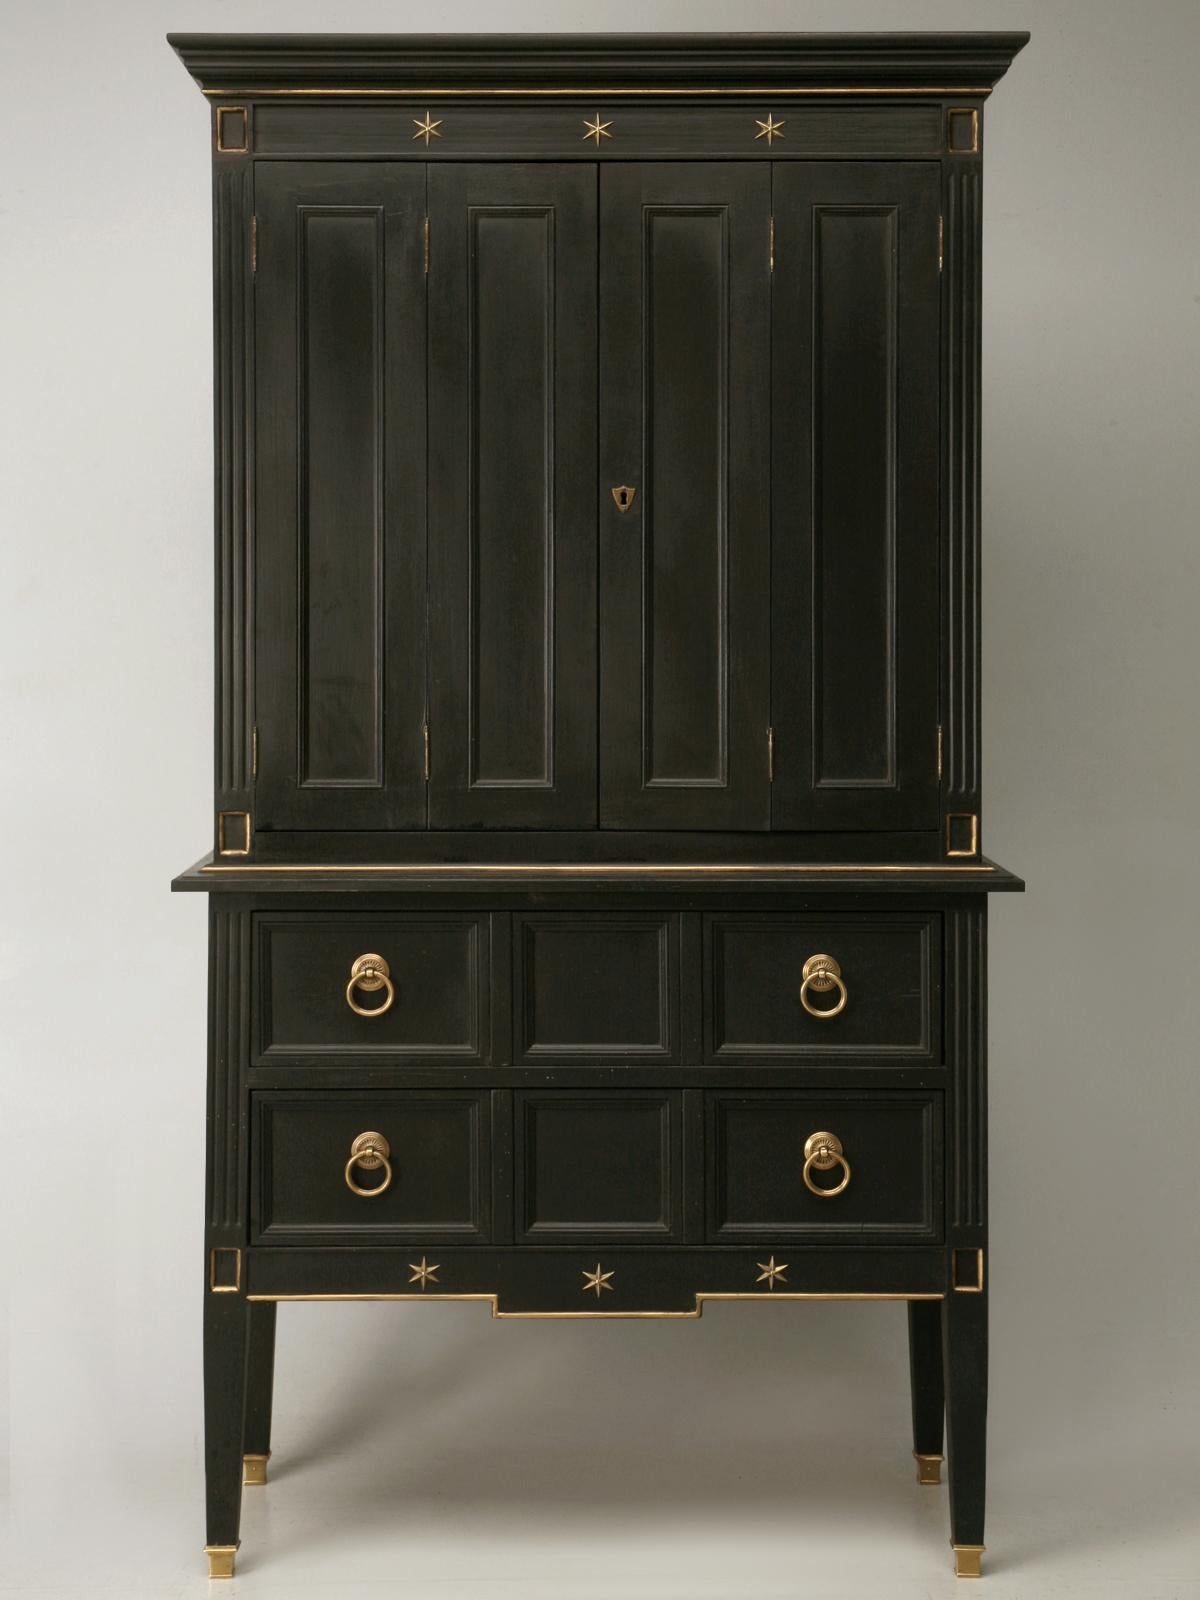 Stunning French 1940's Jacques Adnet style cupboard with double bi-fold doors over a lower base section with two convenient and very useful full width drawers. The finish is black paint with contrasting gold highlights, the bronze stars add extra